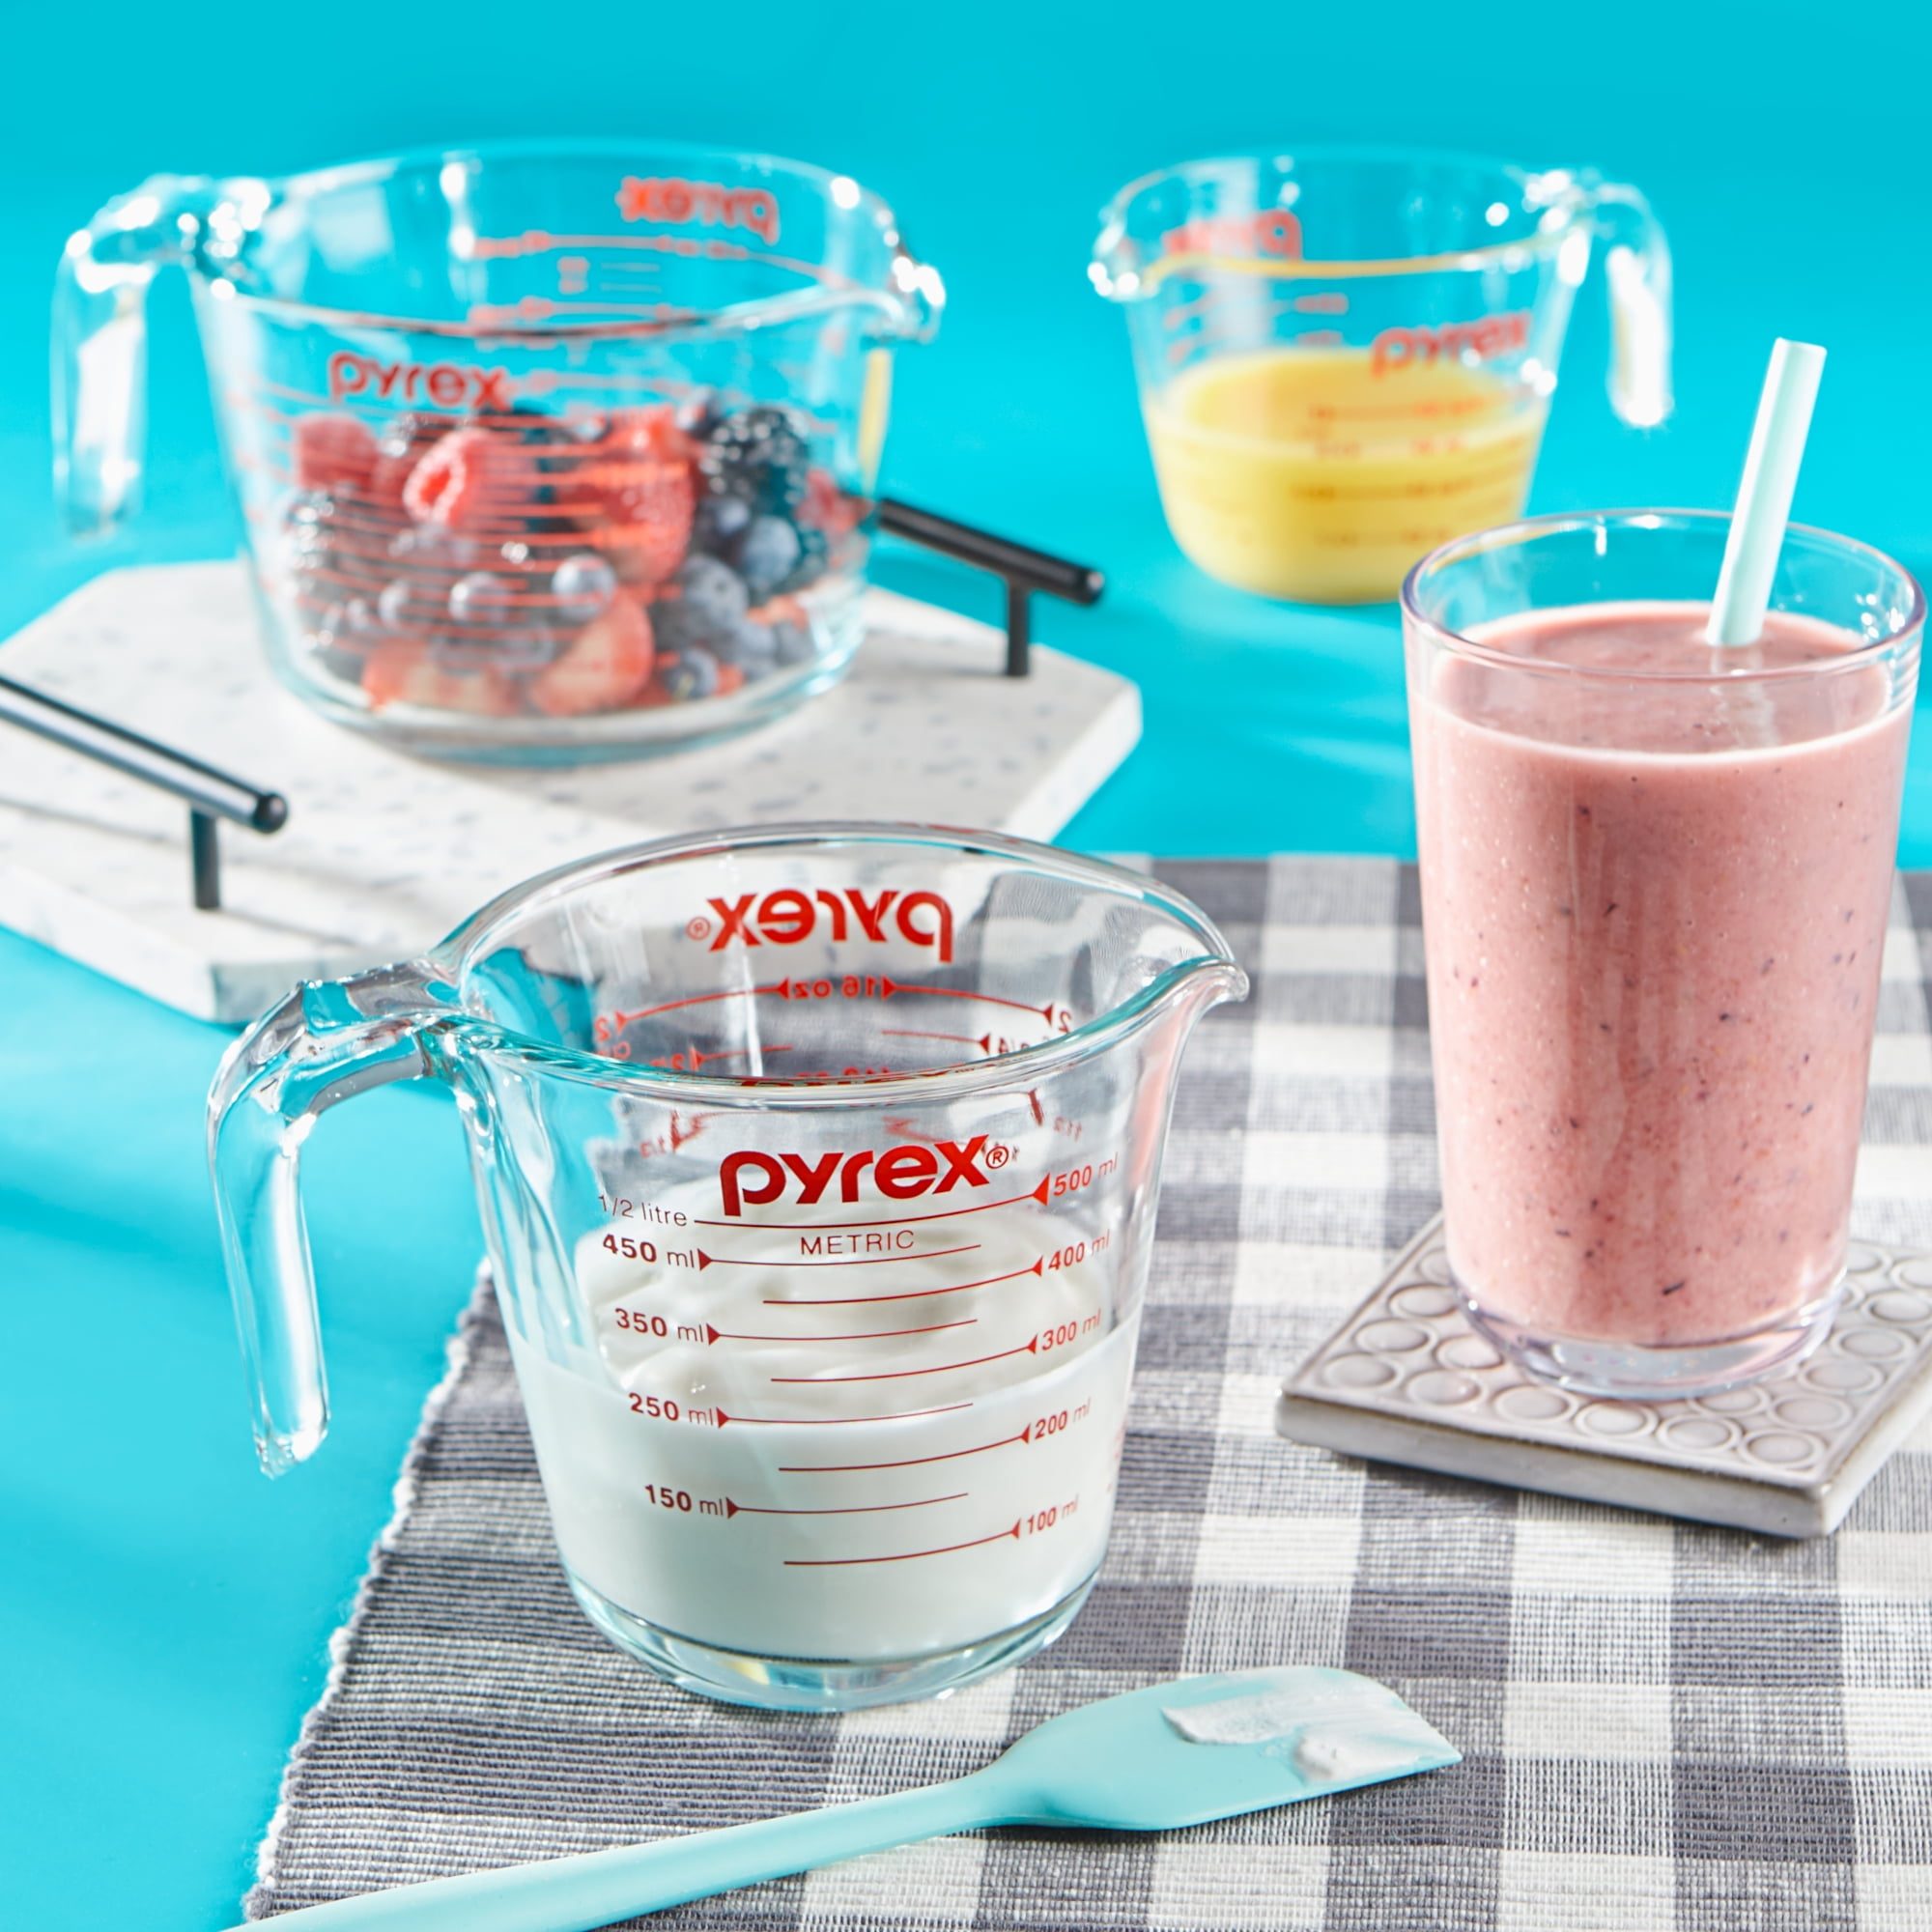 pyrex glass measuring cup set 3-piece 4,2,1 Cup microwable made In